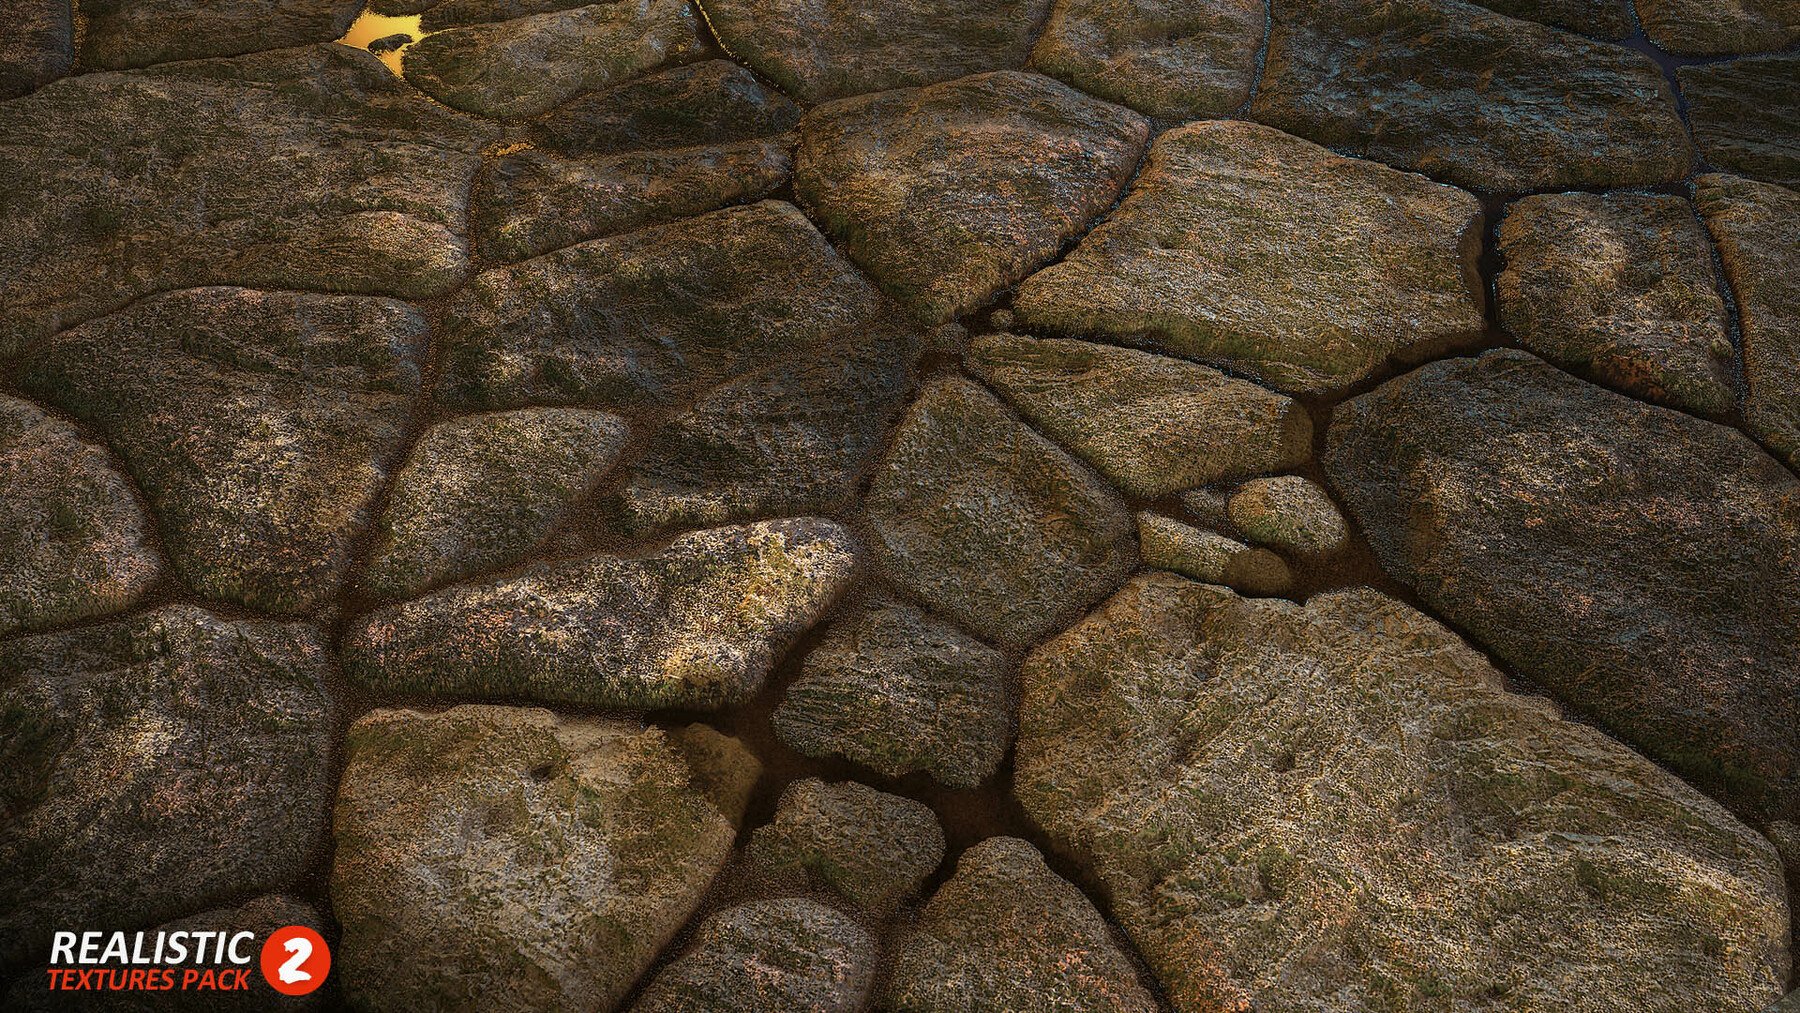 ArtStation - Realistic Textures Pack 2 | Game Assets